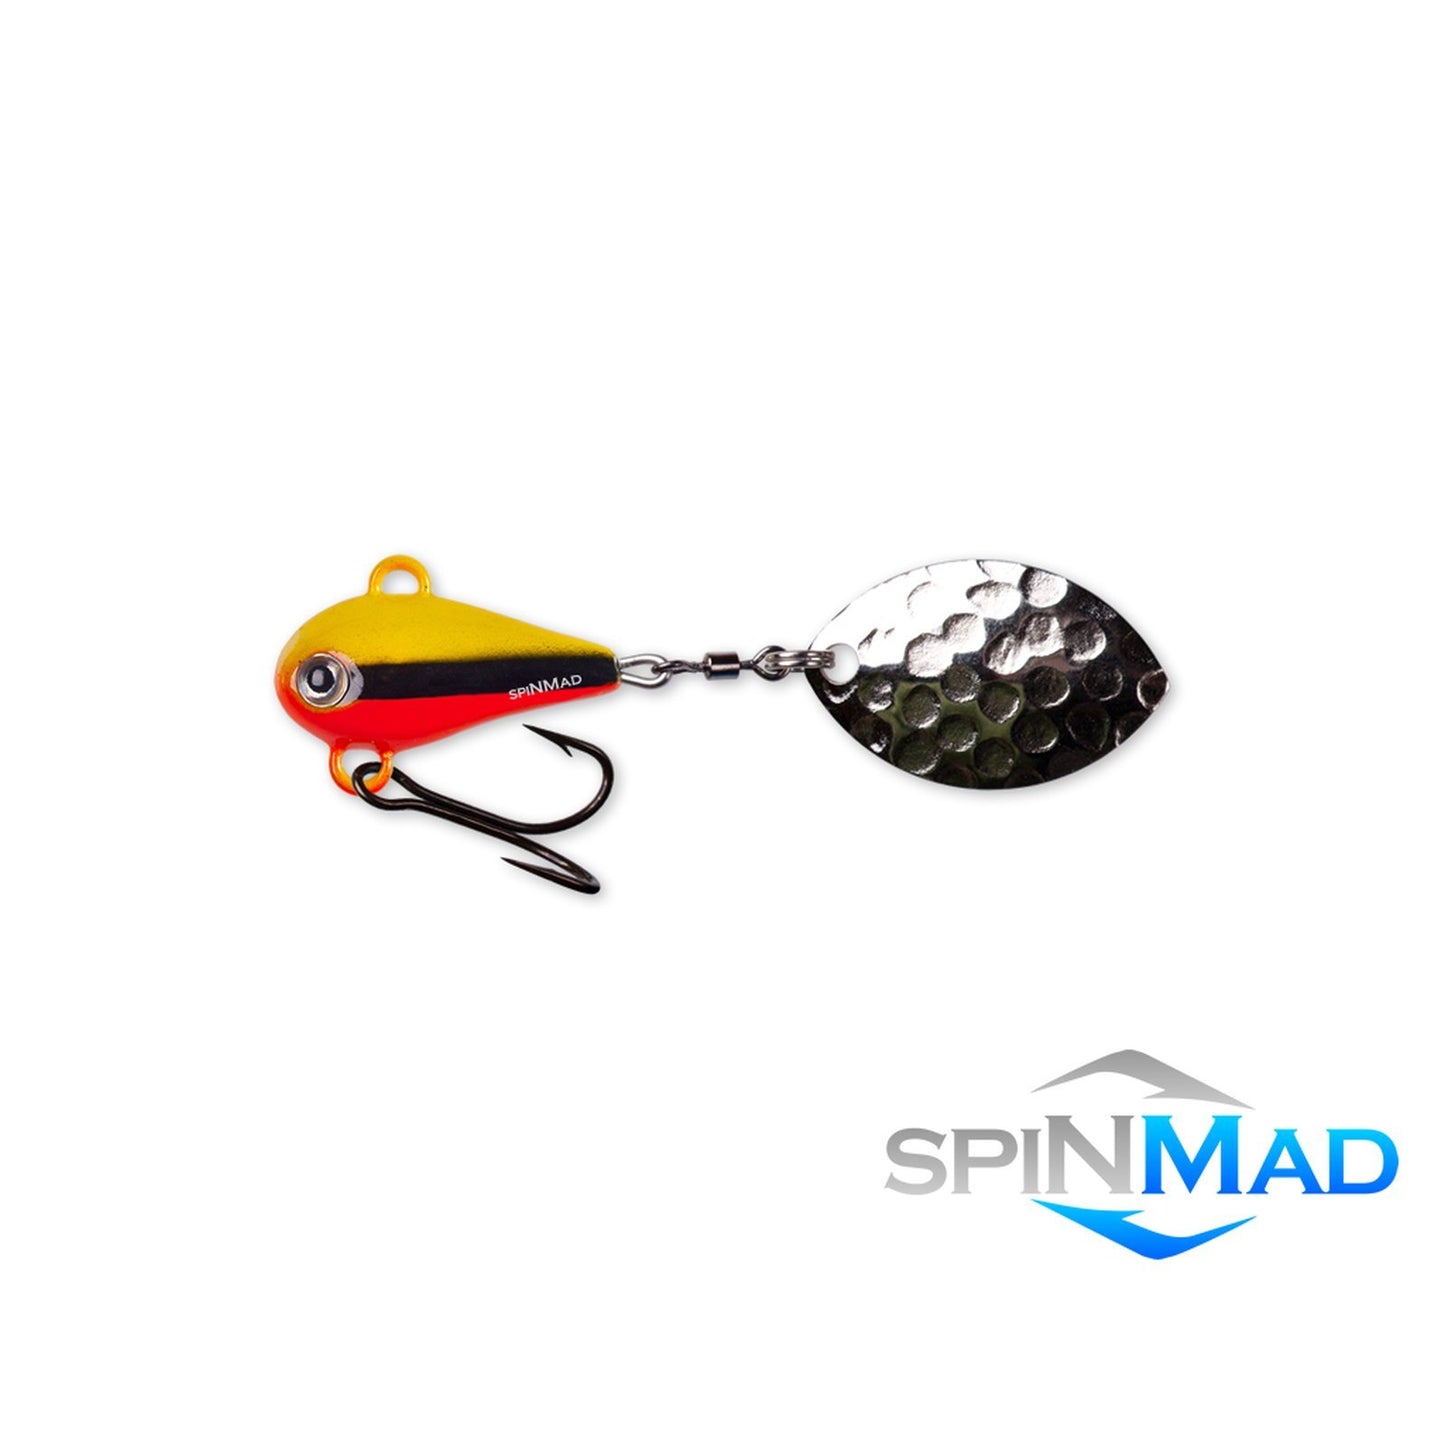 SpinMad MAG 6 0712